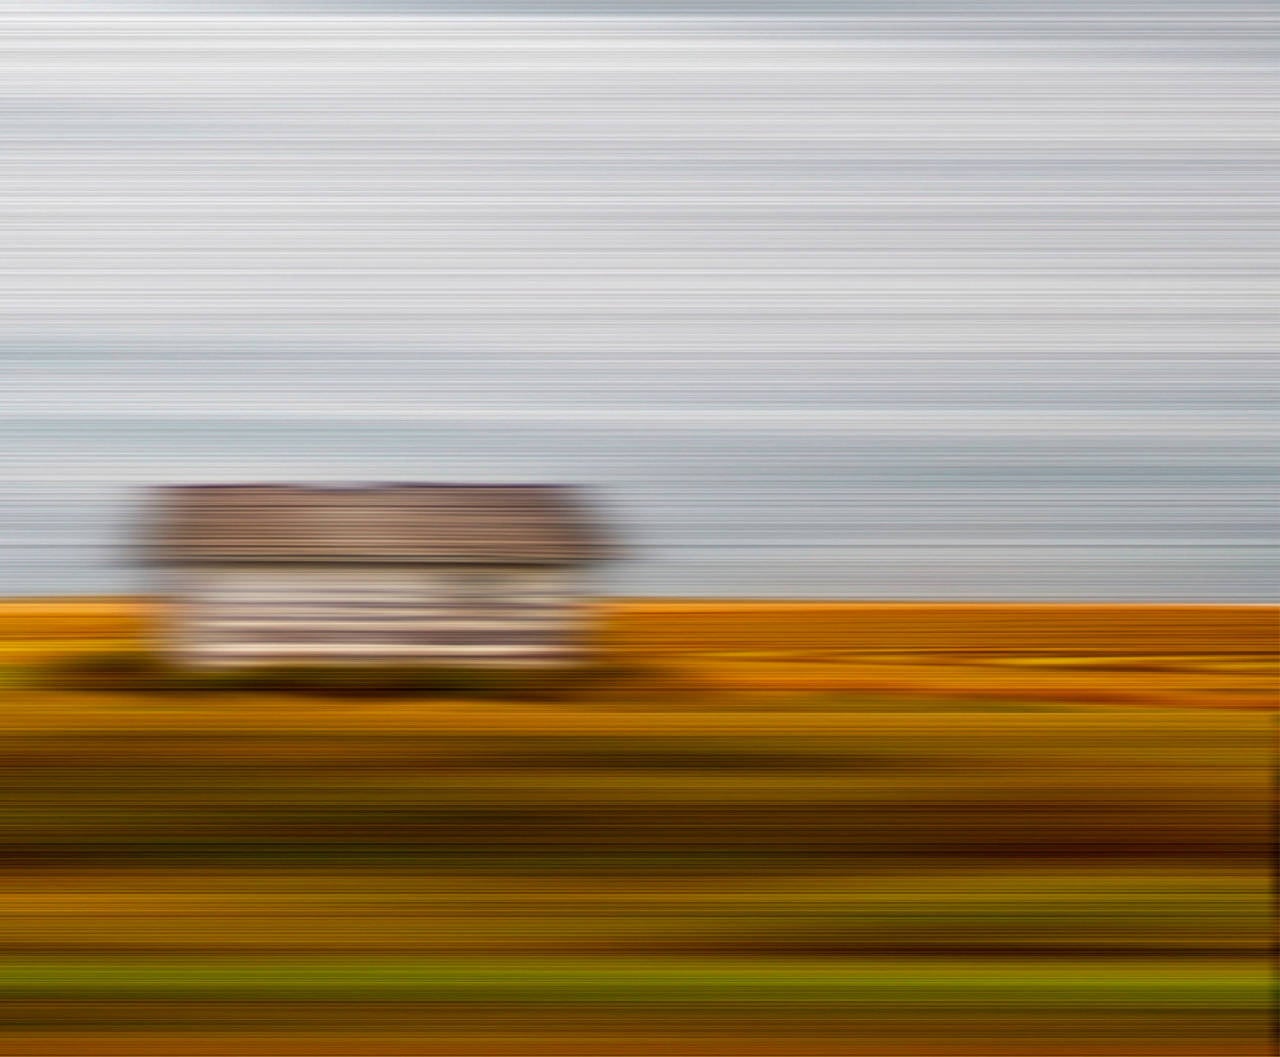 Farmland Afternoon V2 - contemporary, abstract landscape, photography on dibond - Photograph by Etienne Labbe